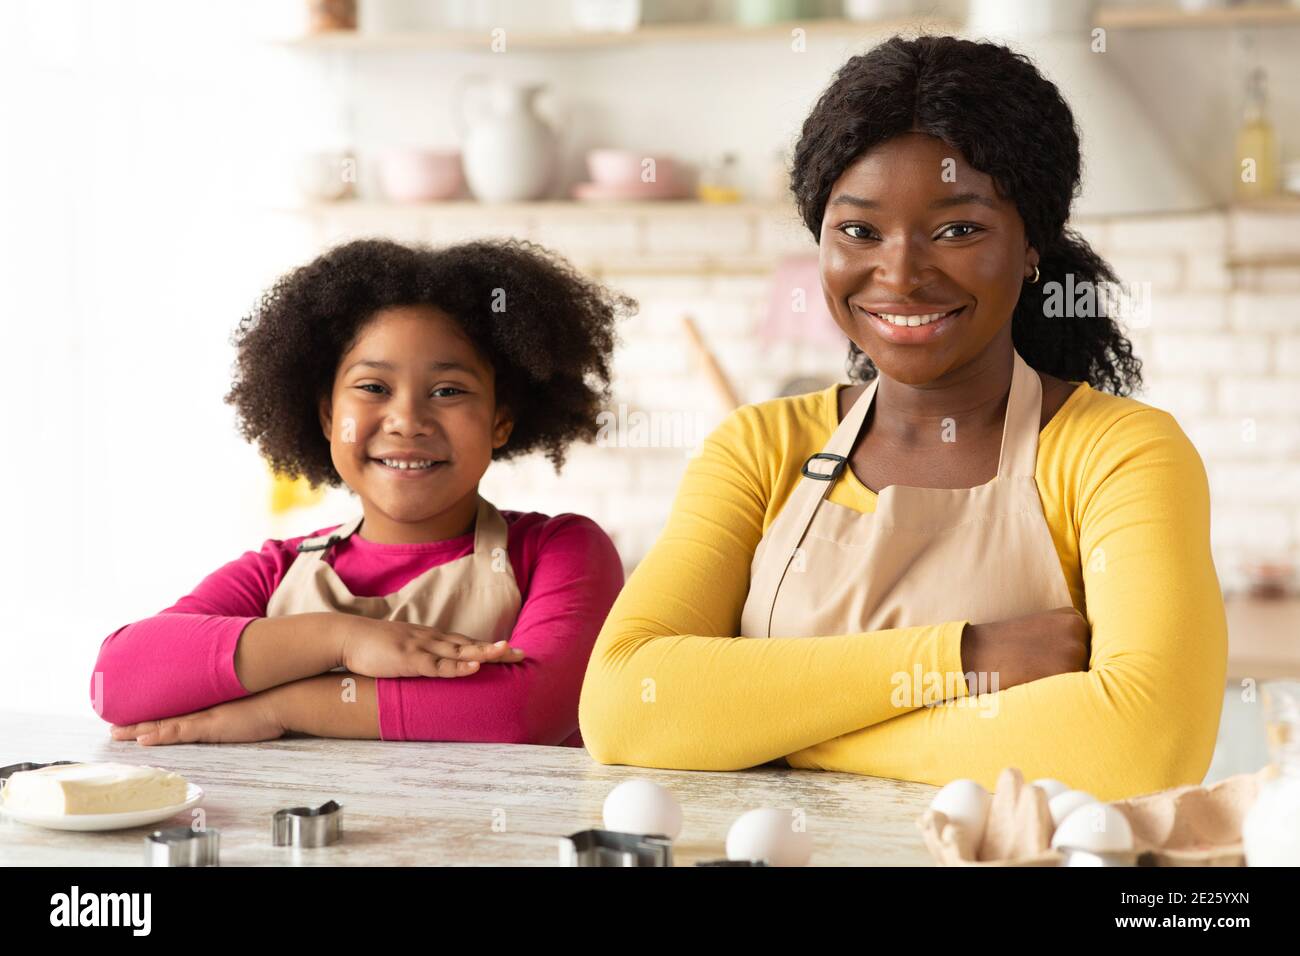 https://c8.alamy.com/comp/2E25YXN/happy-black-mom-and-daughter-in-aprons-sitting-at-table-in-kitchen-2E25YXN.jpg